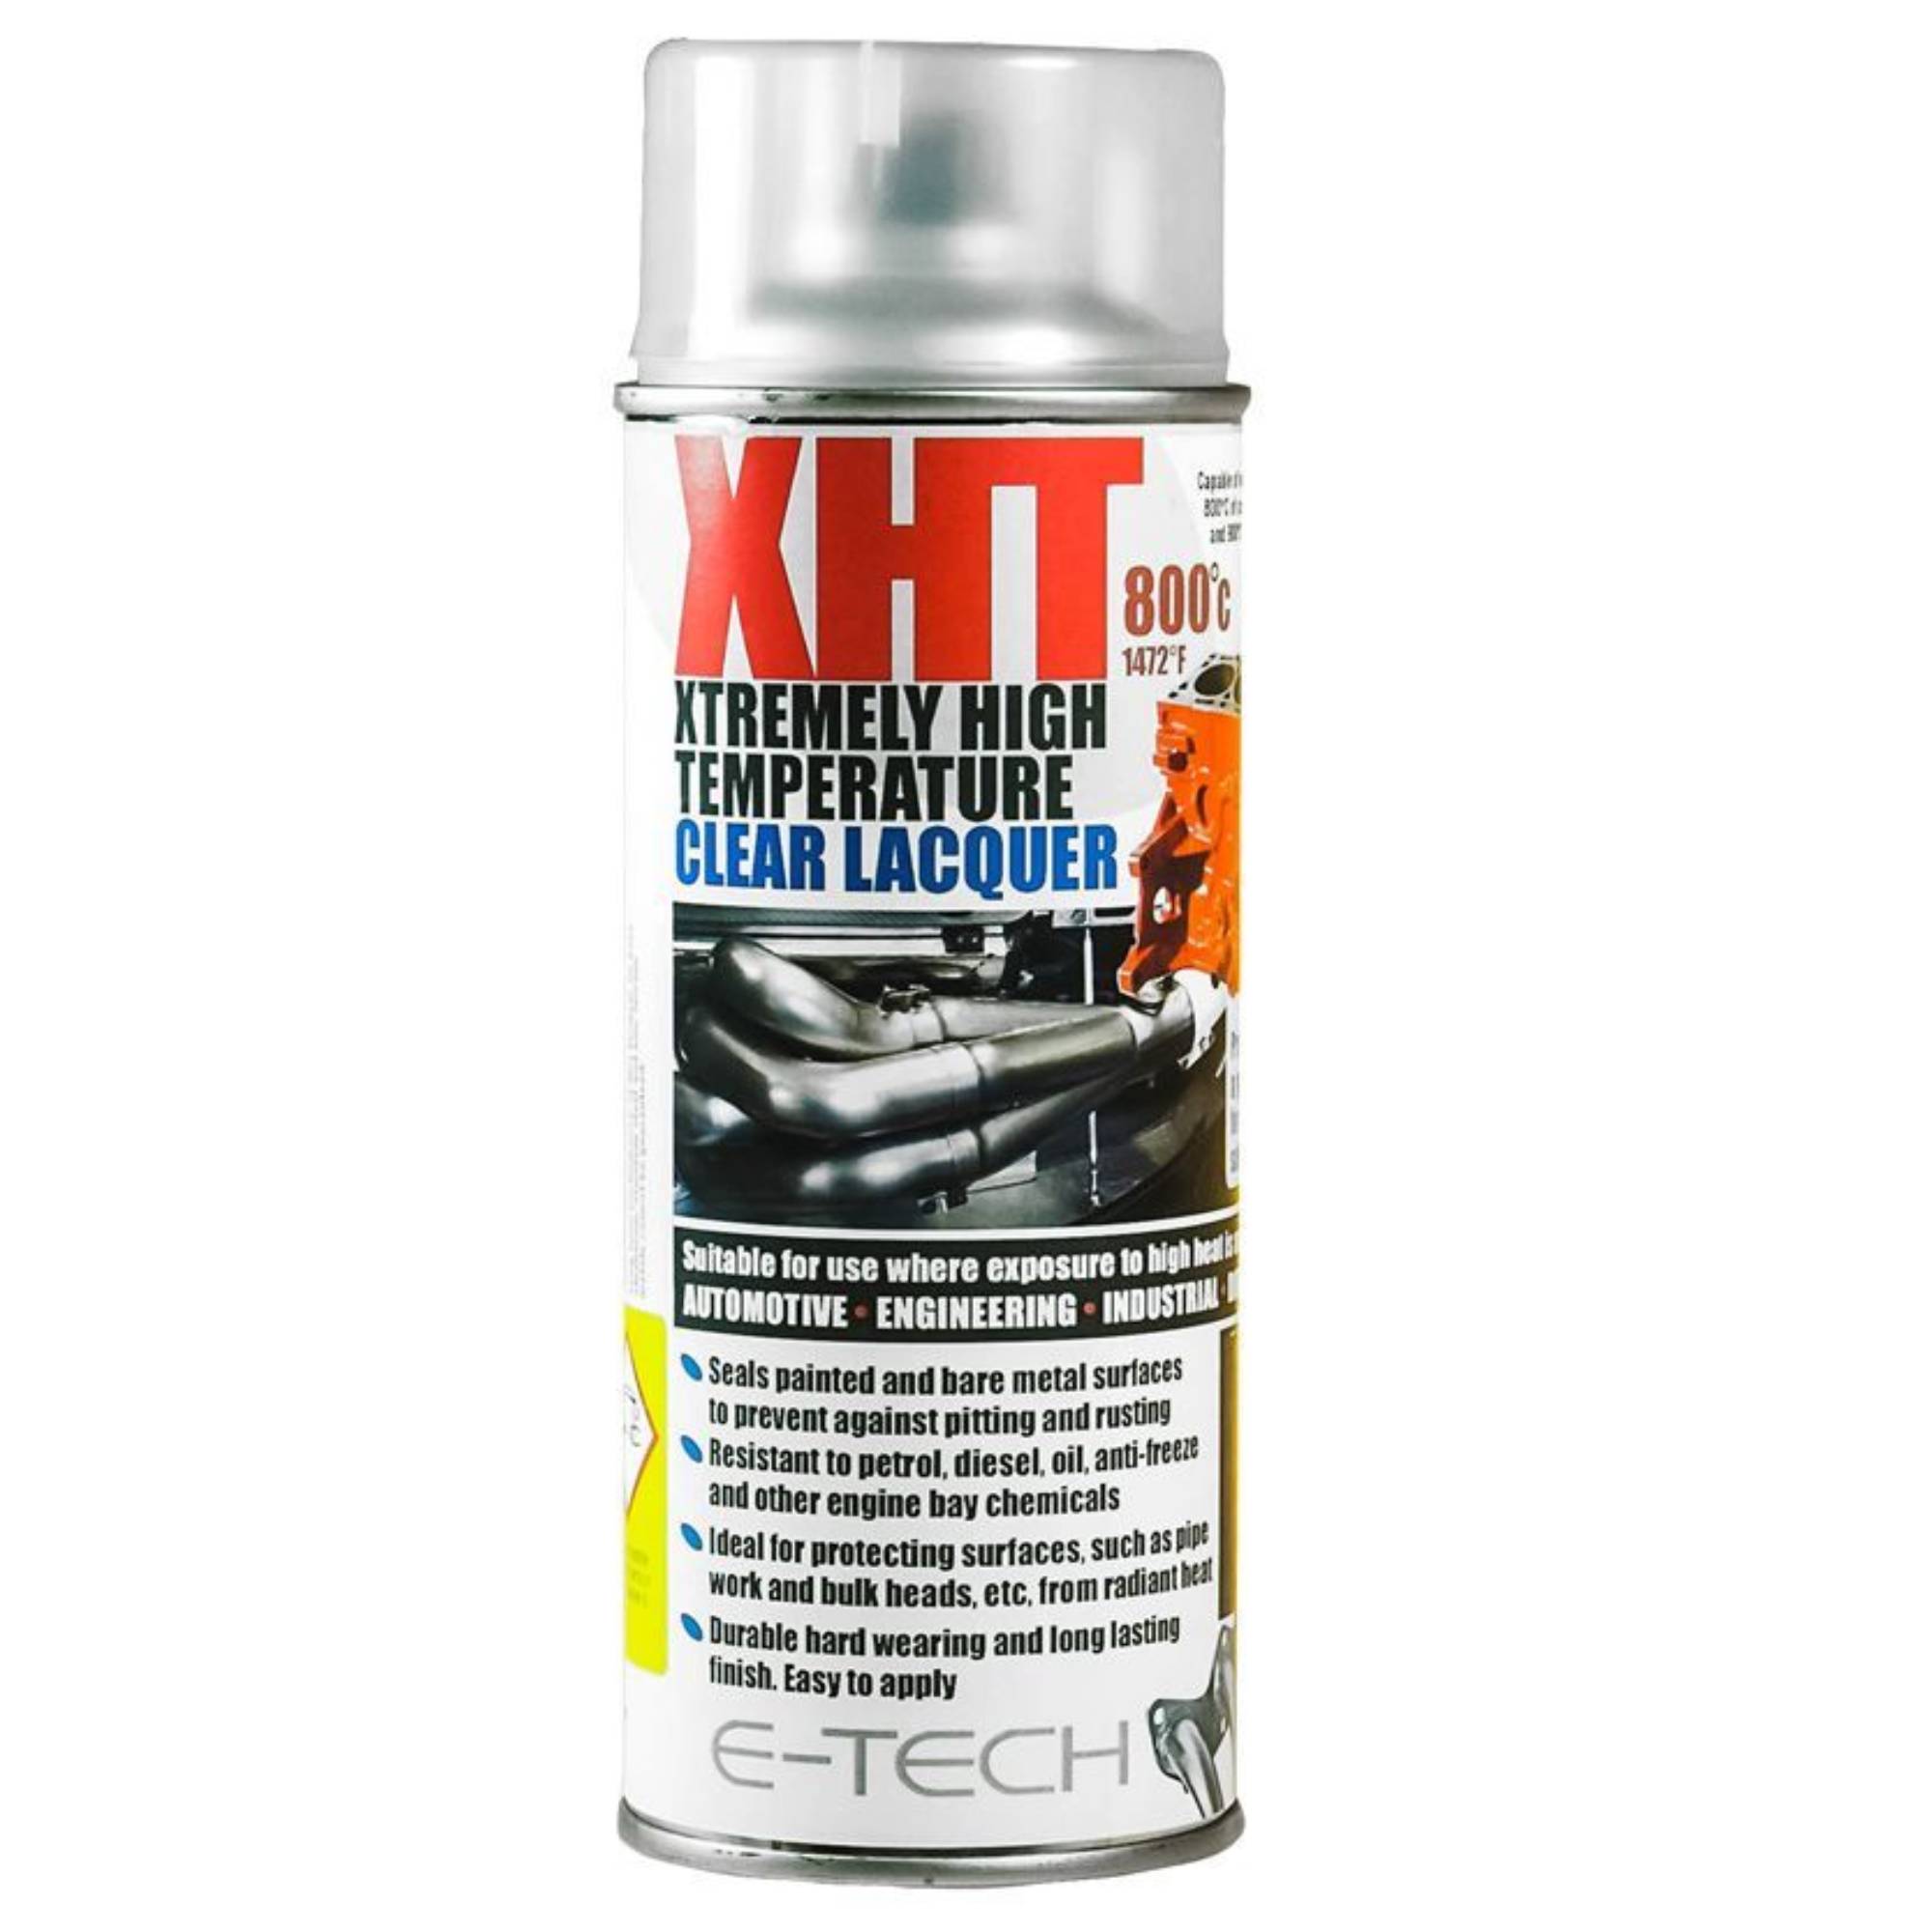 E-Tech Xht Xtremely High Temperature Clear Lacquer